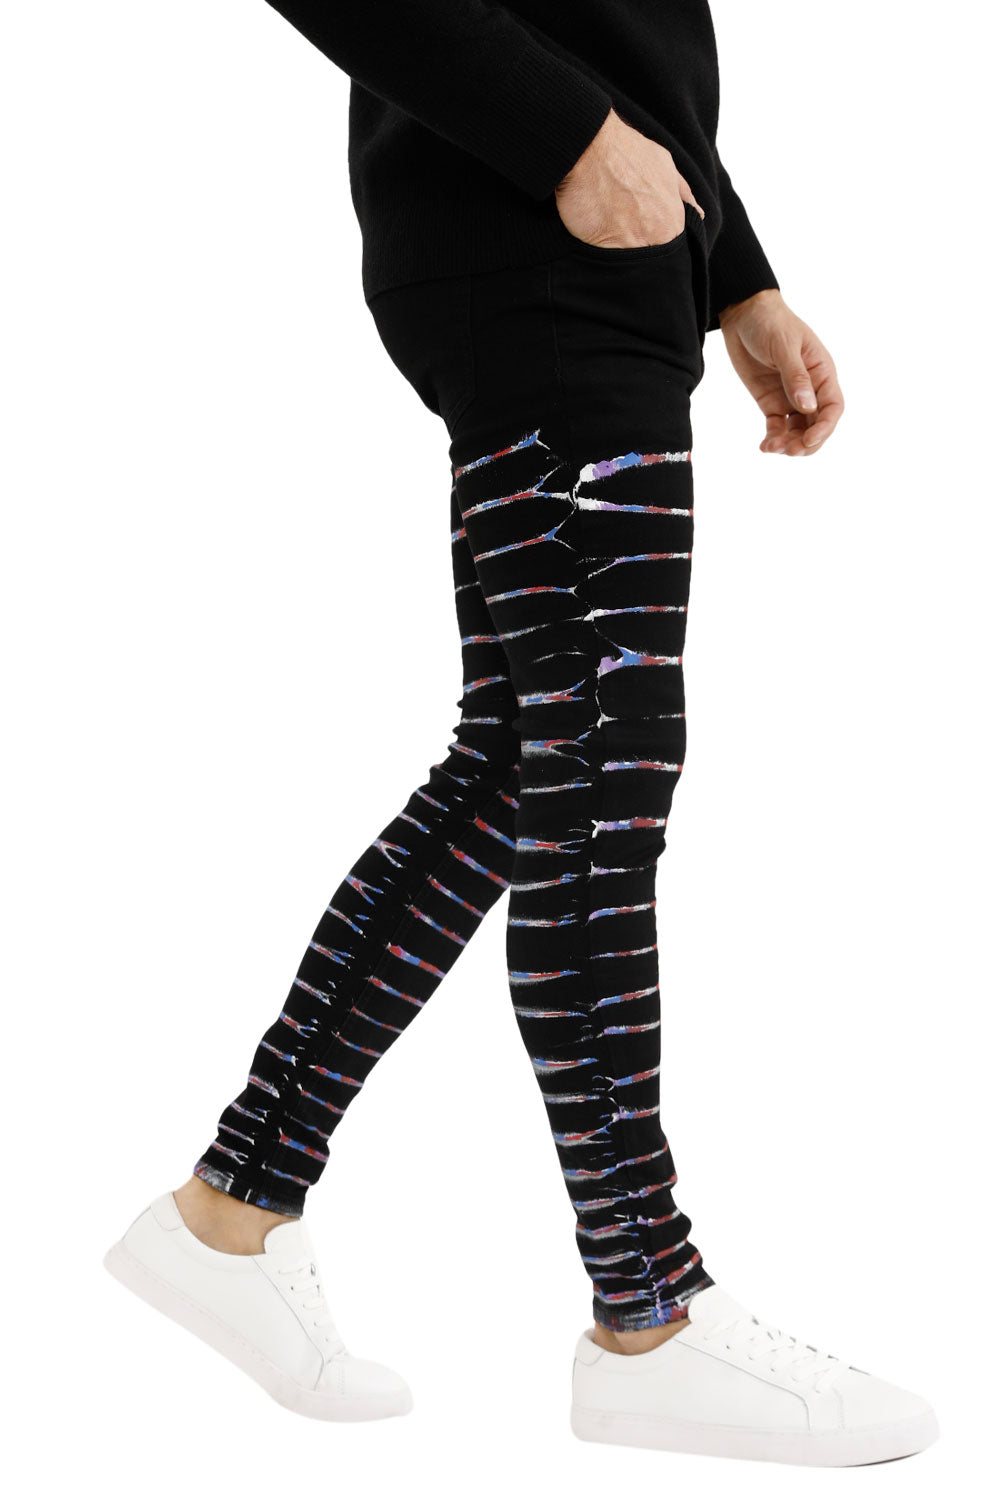 Heren Stijlvolle Hiphop Skinny Jeans Stretch Jeans